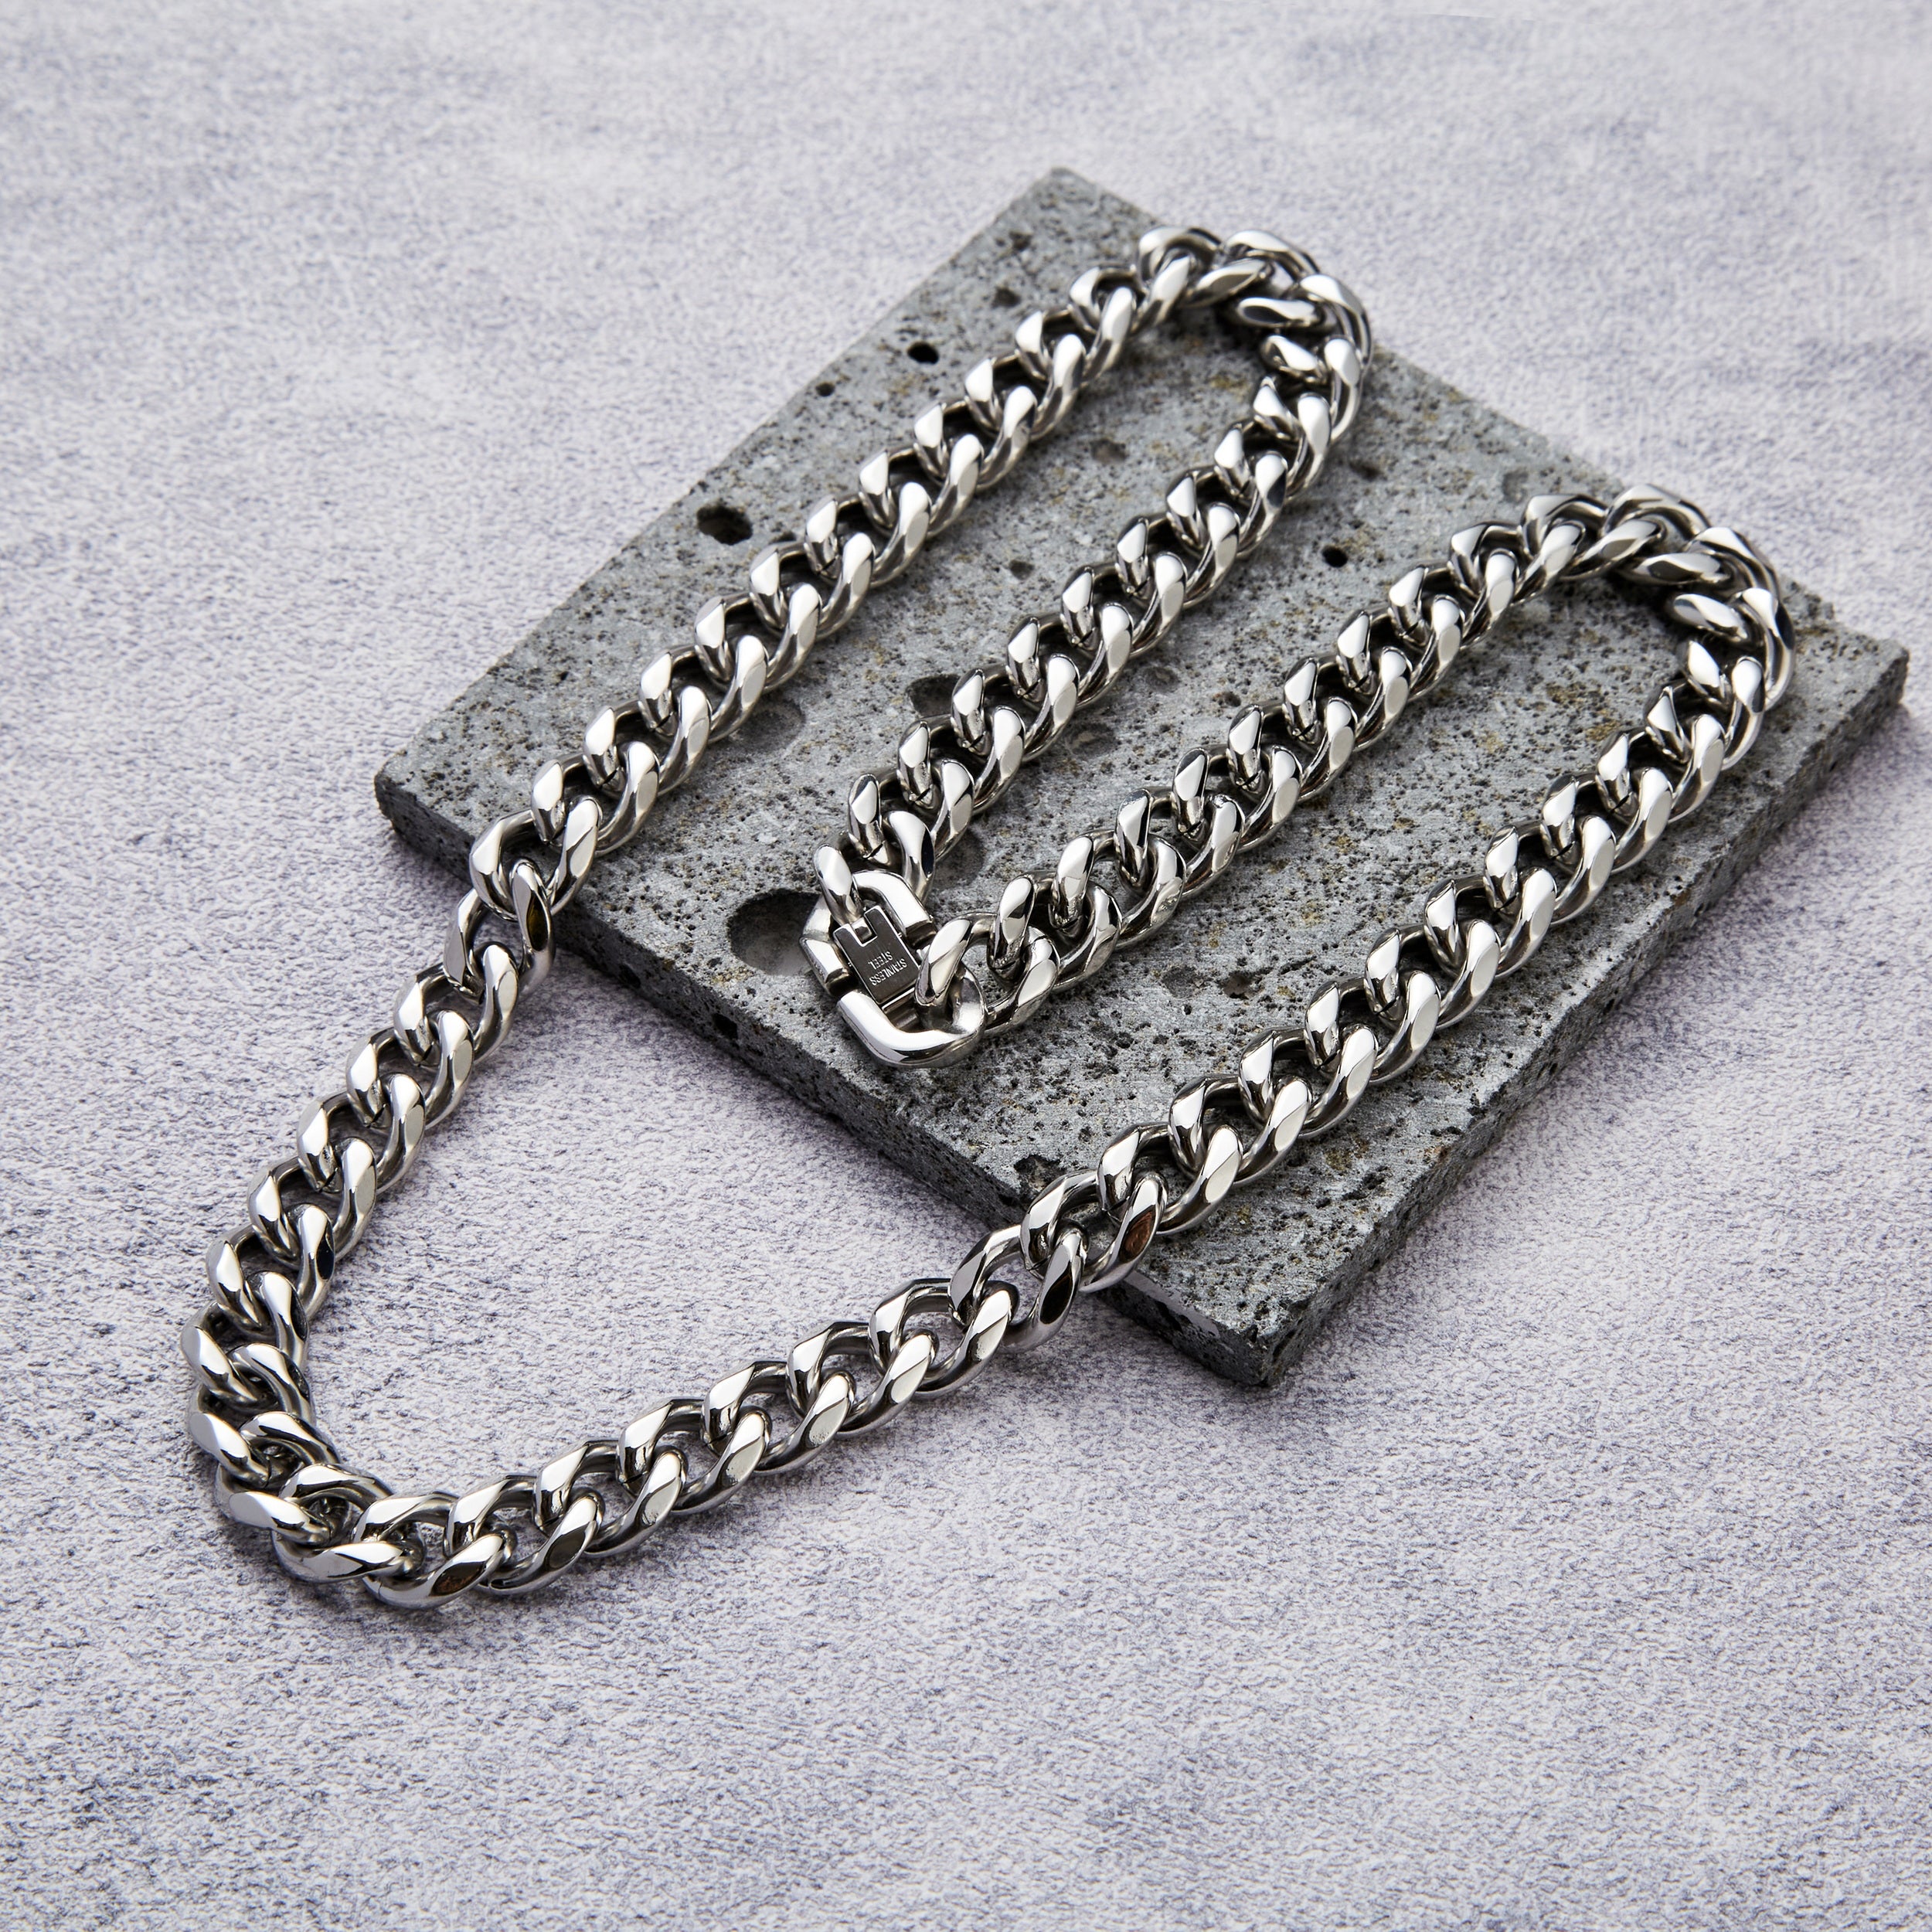 Men's 12mm Stainless Steel 18-24 Inch Cuban Curb Chain Necklace